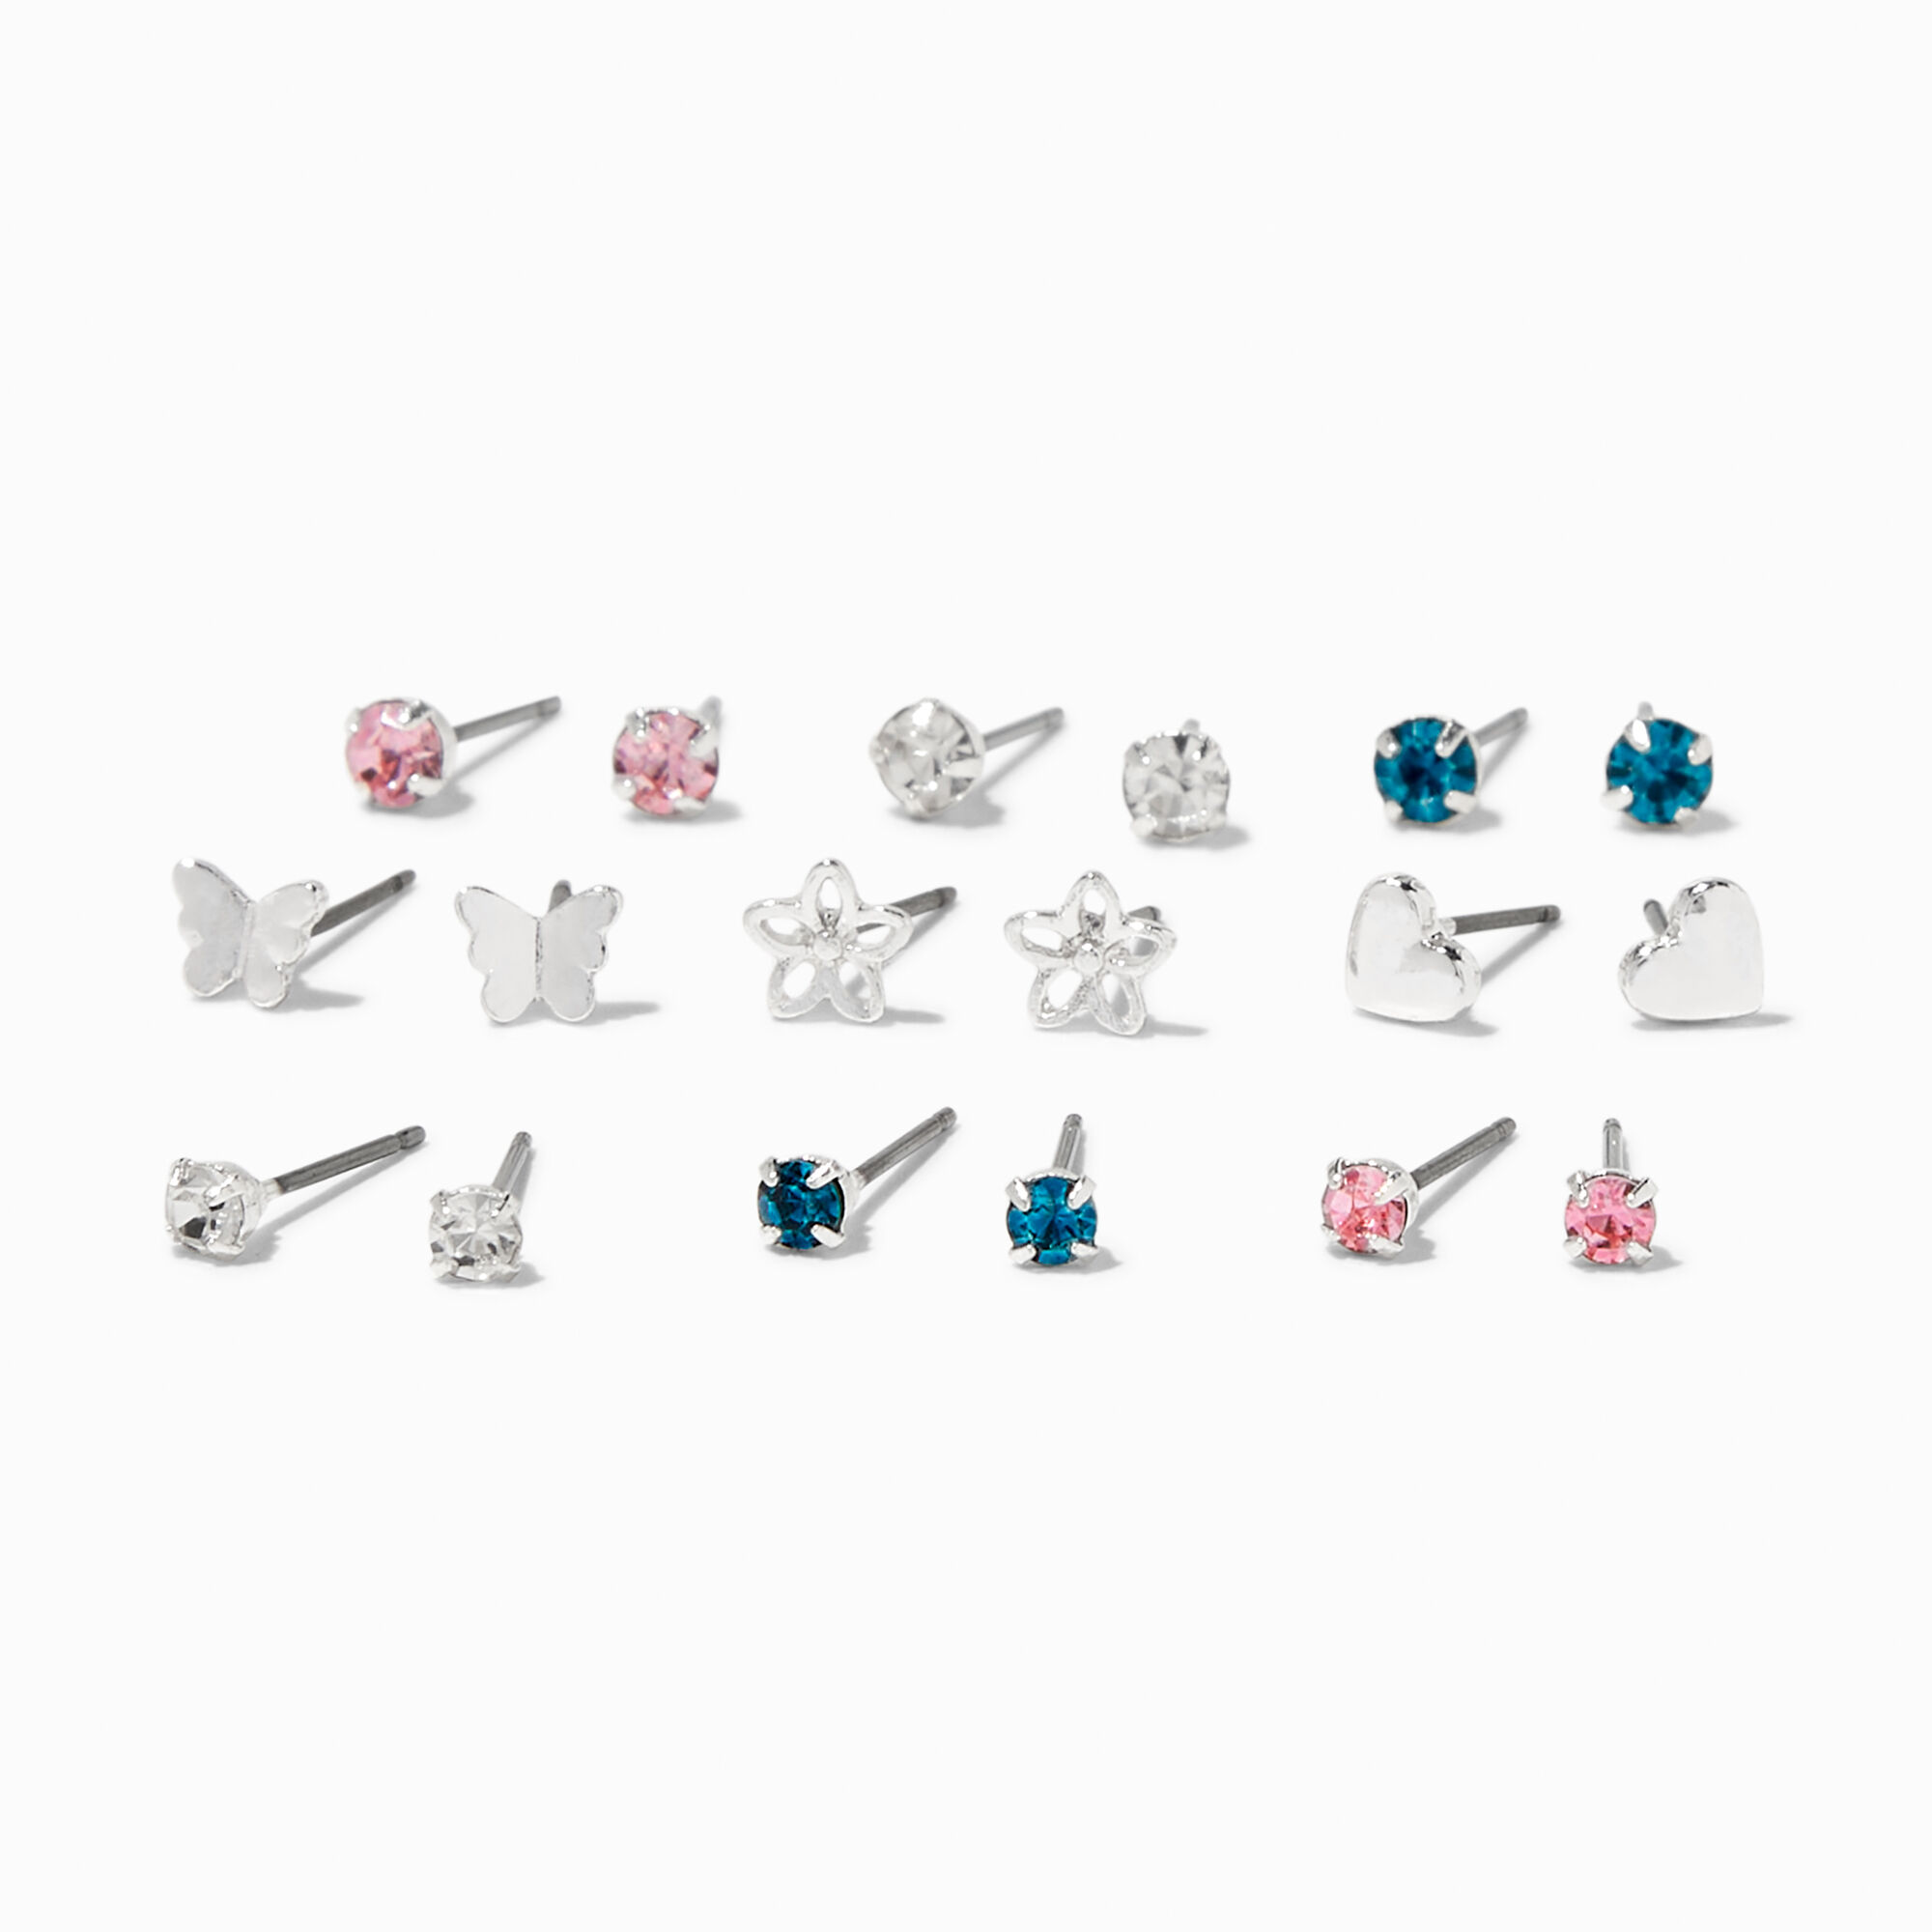 View Claires Tone Floral Hearts Stud Earrings 9 Pack Silver information